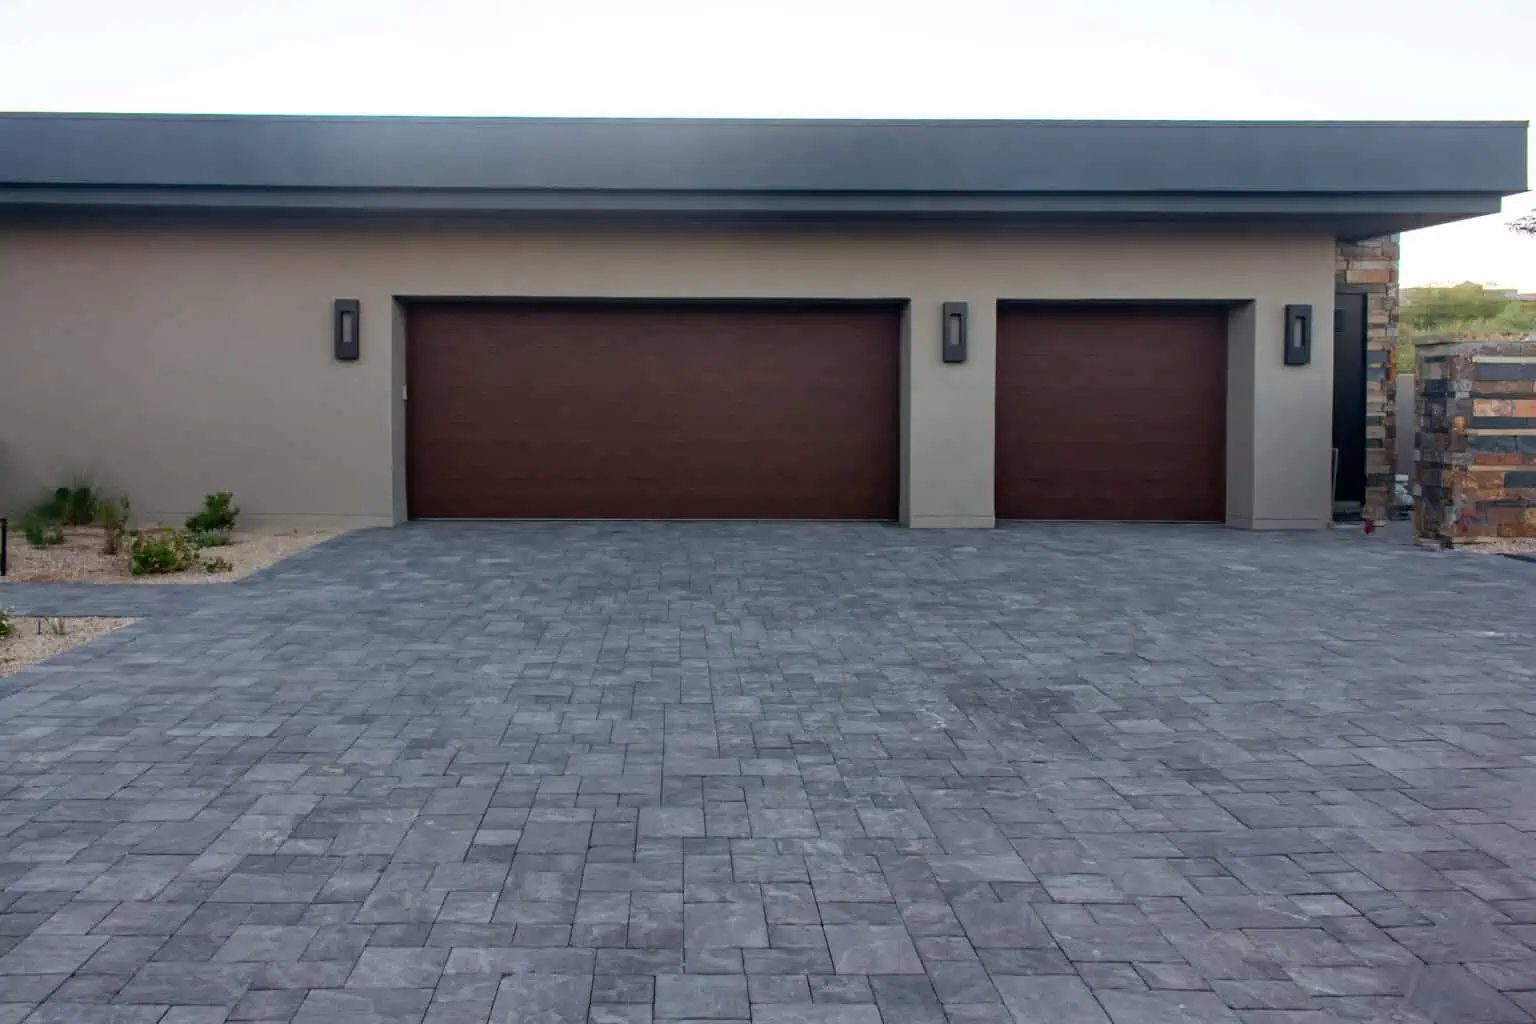 Concrete Pavers - AVIANO Collection_Acker Stone 4pc Aviano Color Antique Pewter-Dark WInchester Stone Veneer_IMG_9950